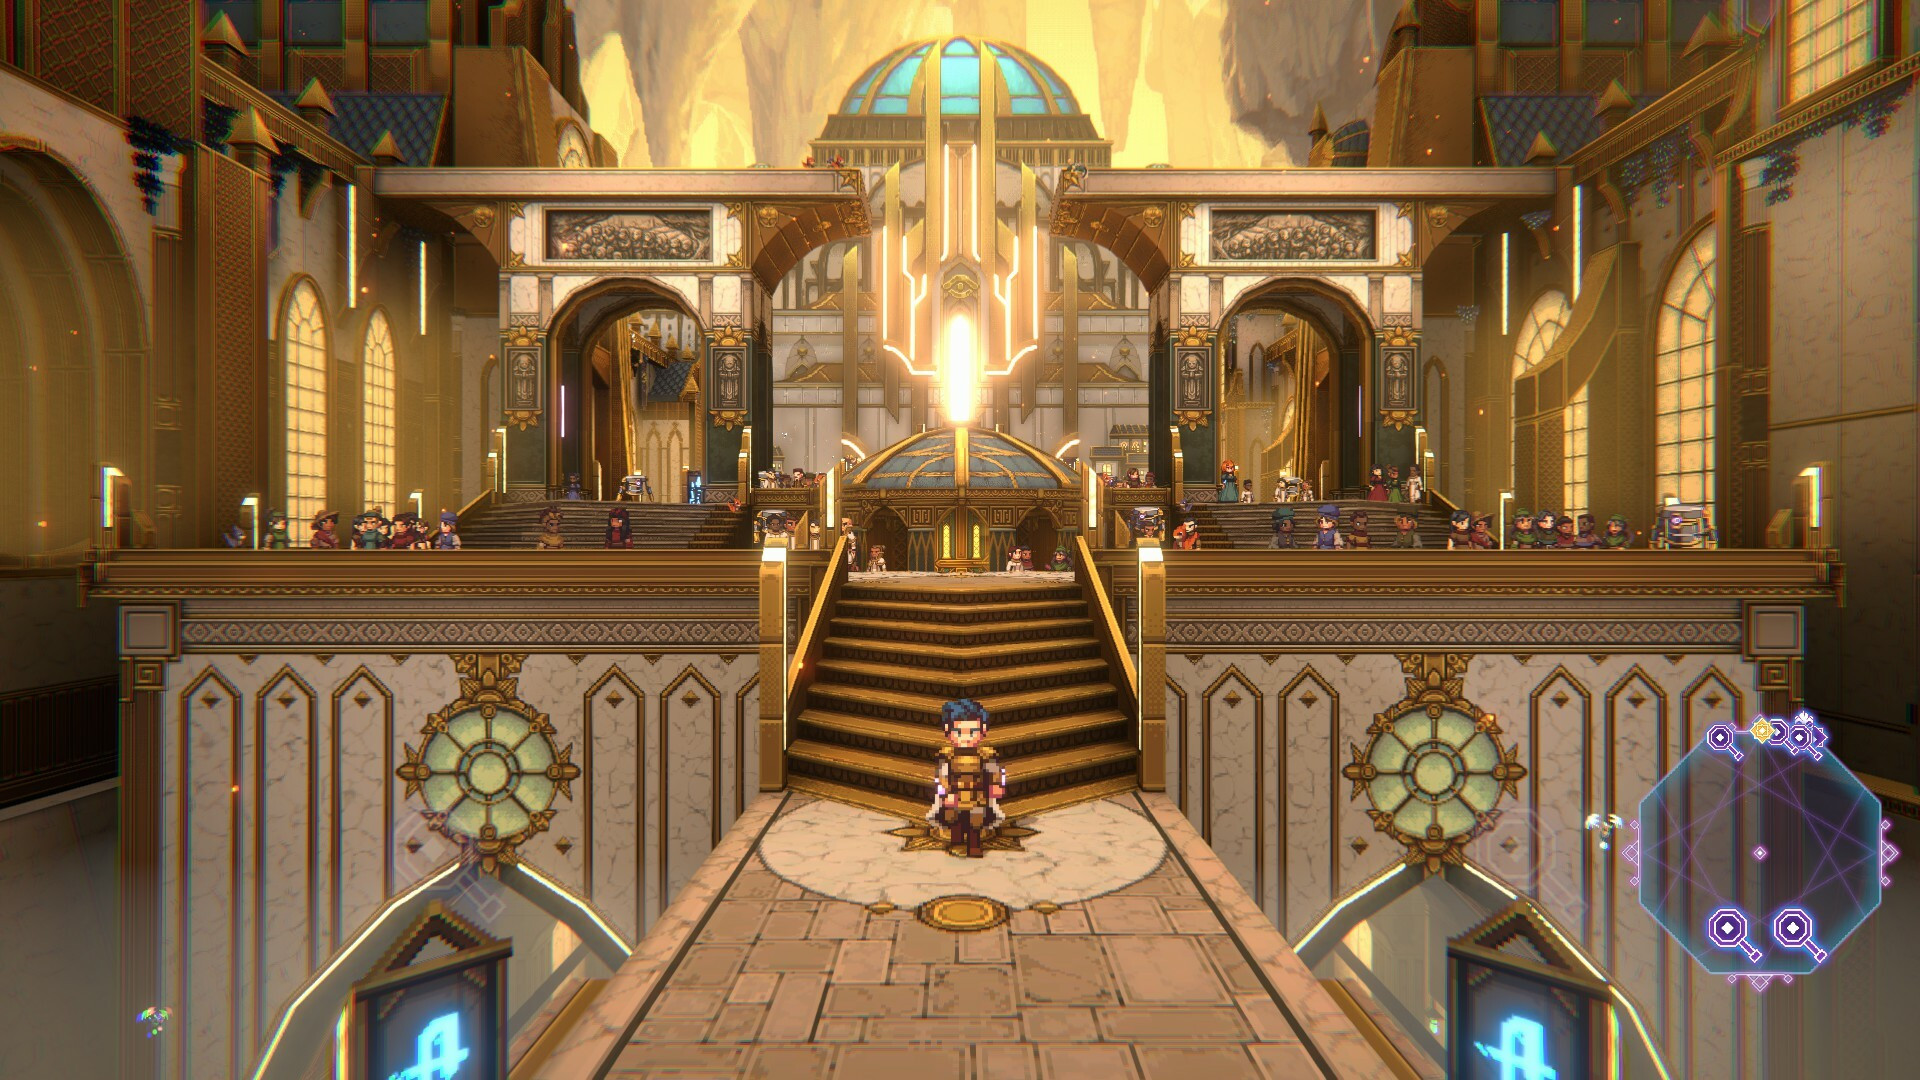 Sacrifire playtest starts for stunning new pixel-art RPG - a character walks down stairs in a vast golden hall.